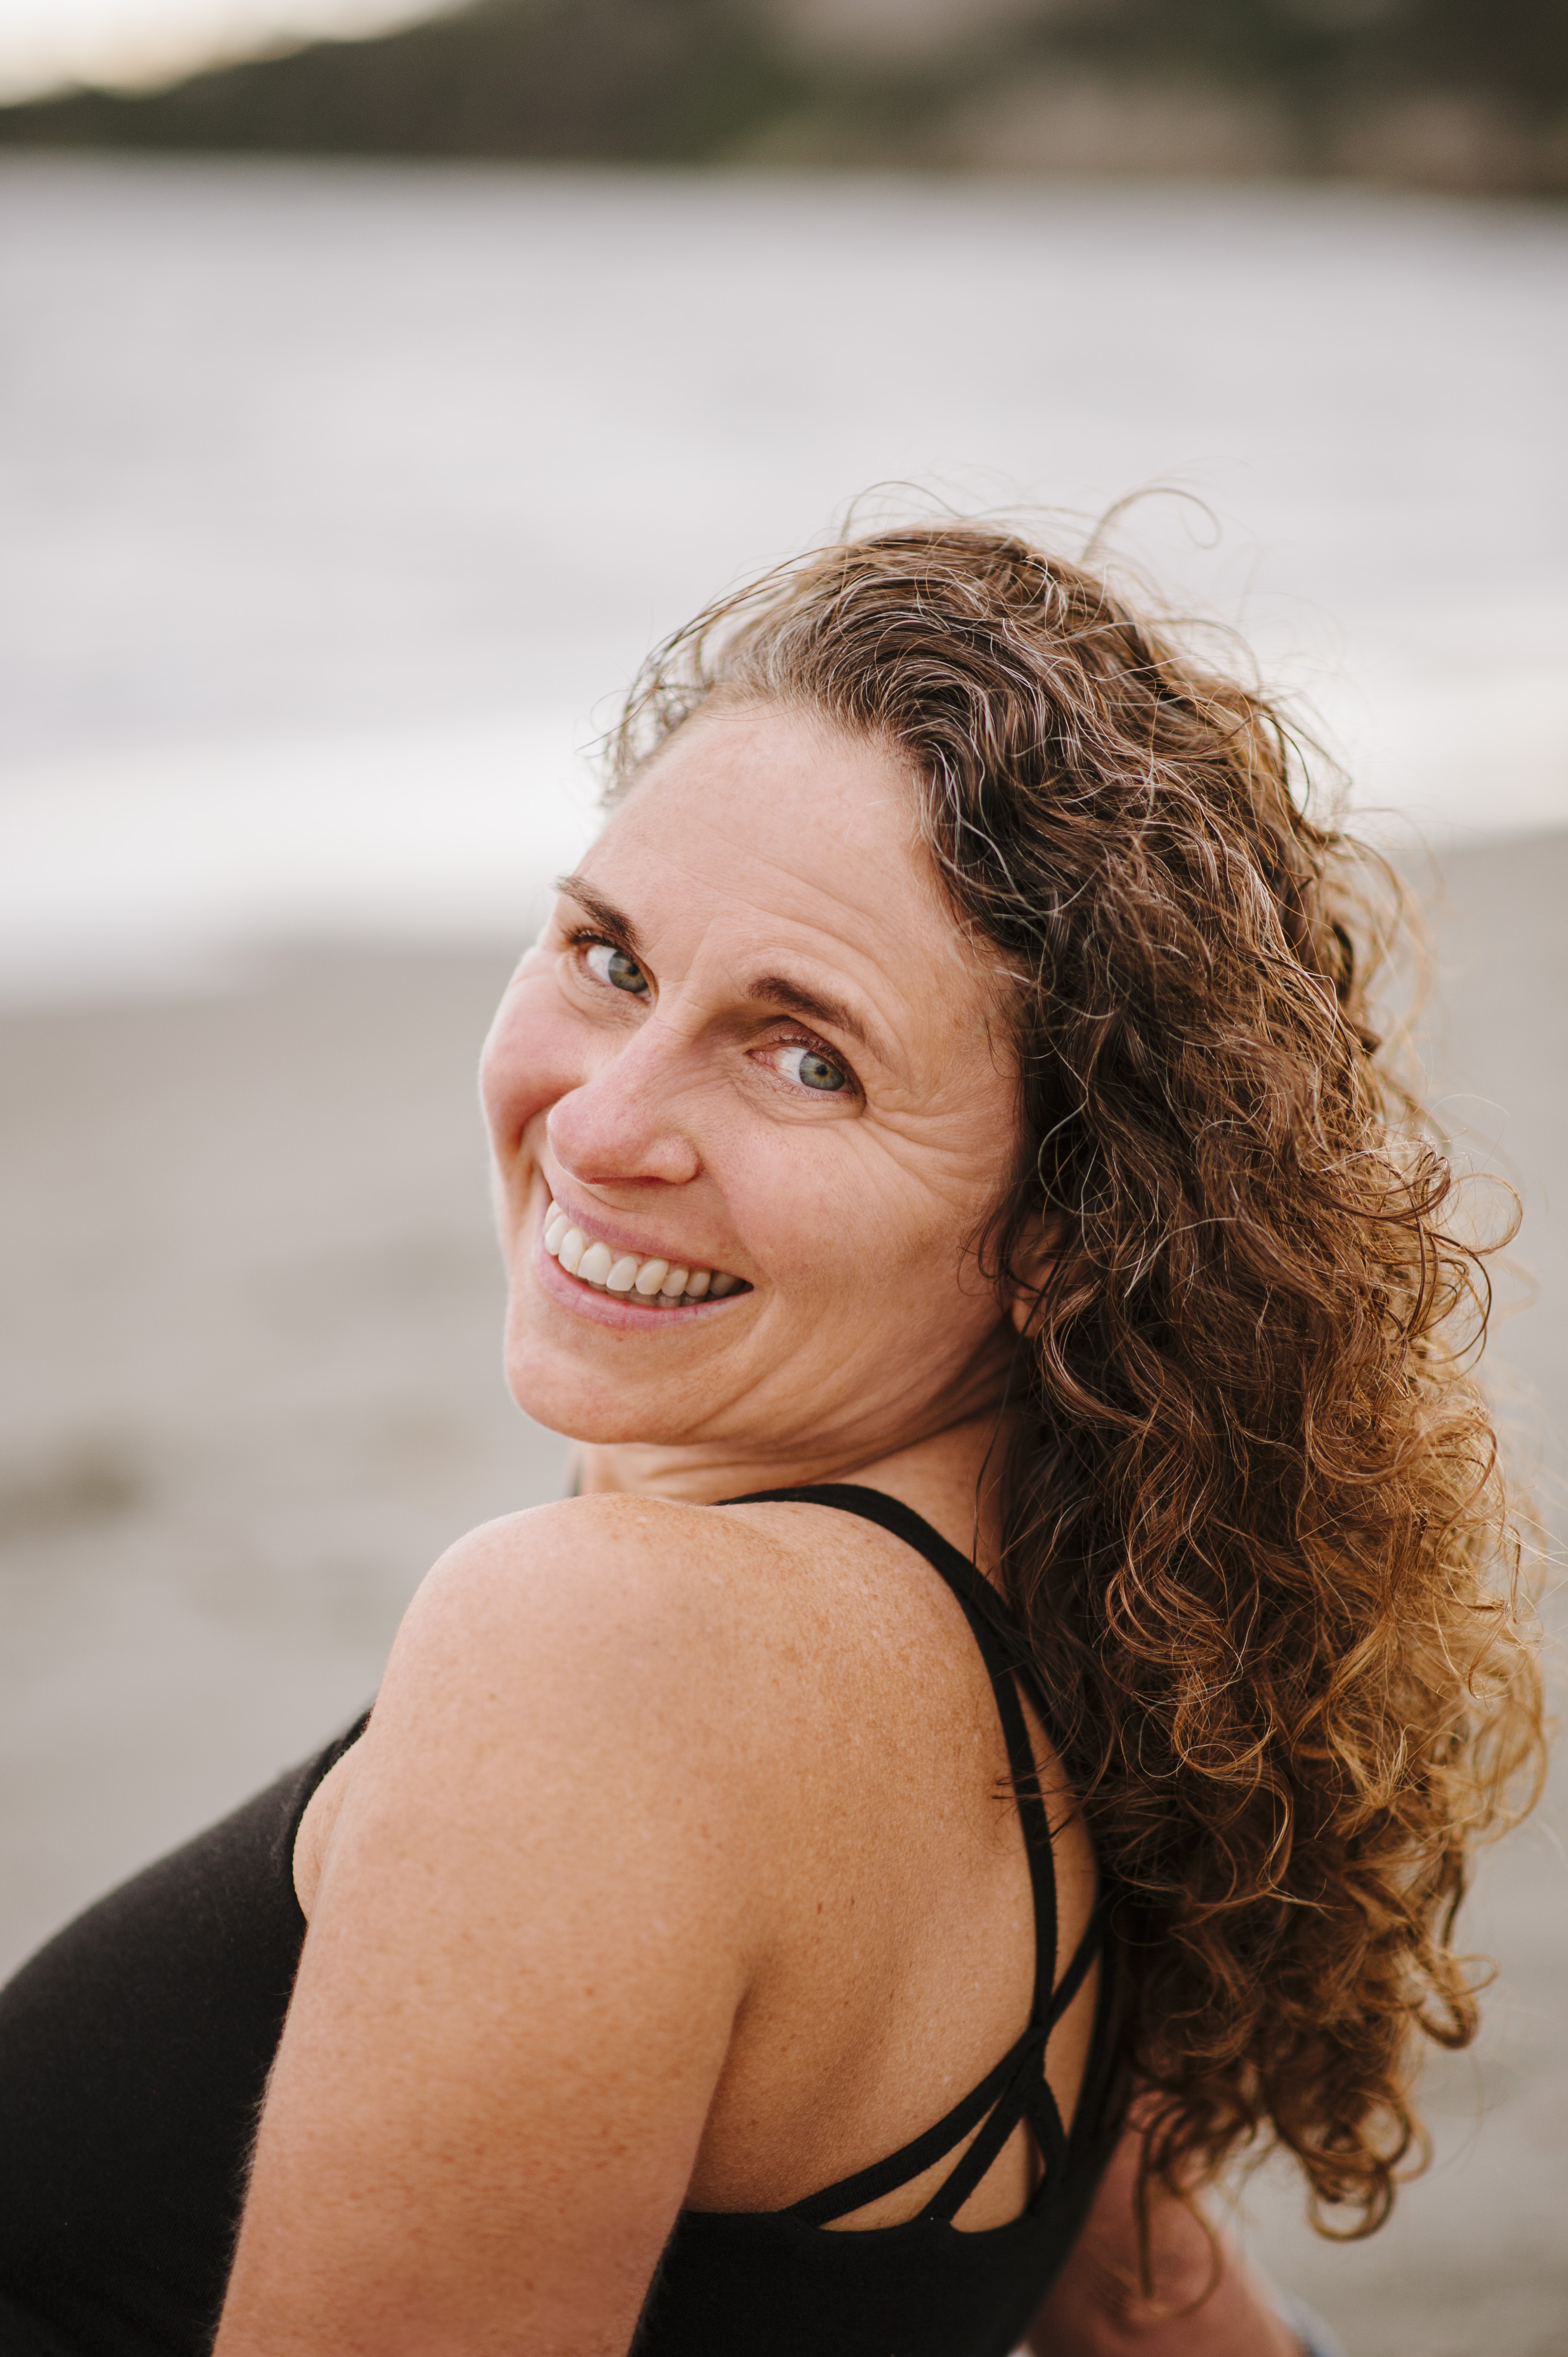 Kimberly Gallagher, Herbalist, Author, Co-founder of LearningHerbs